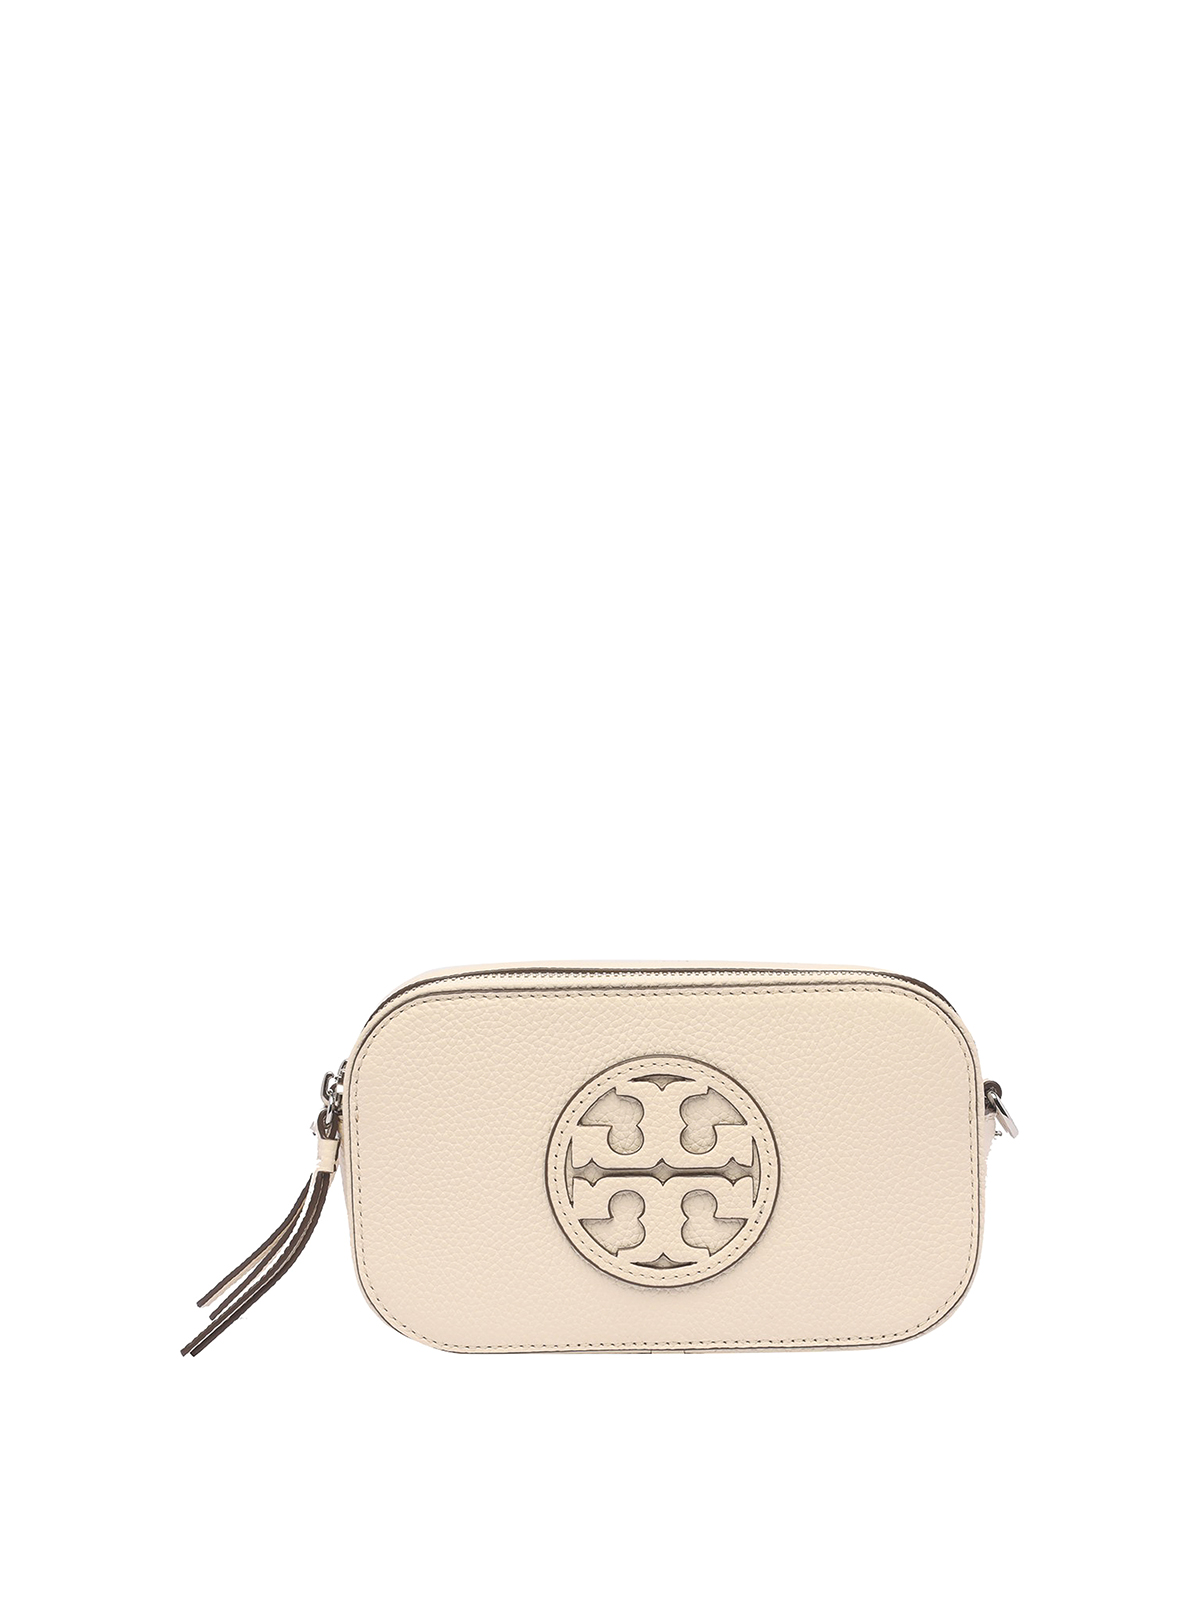 Tory Burch Mini Miller Leather Bag In White